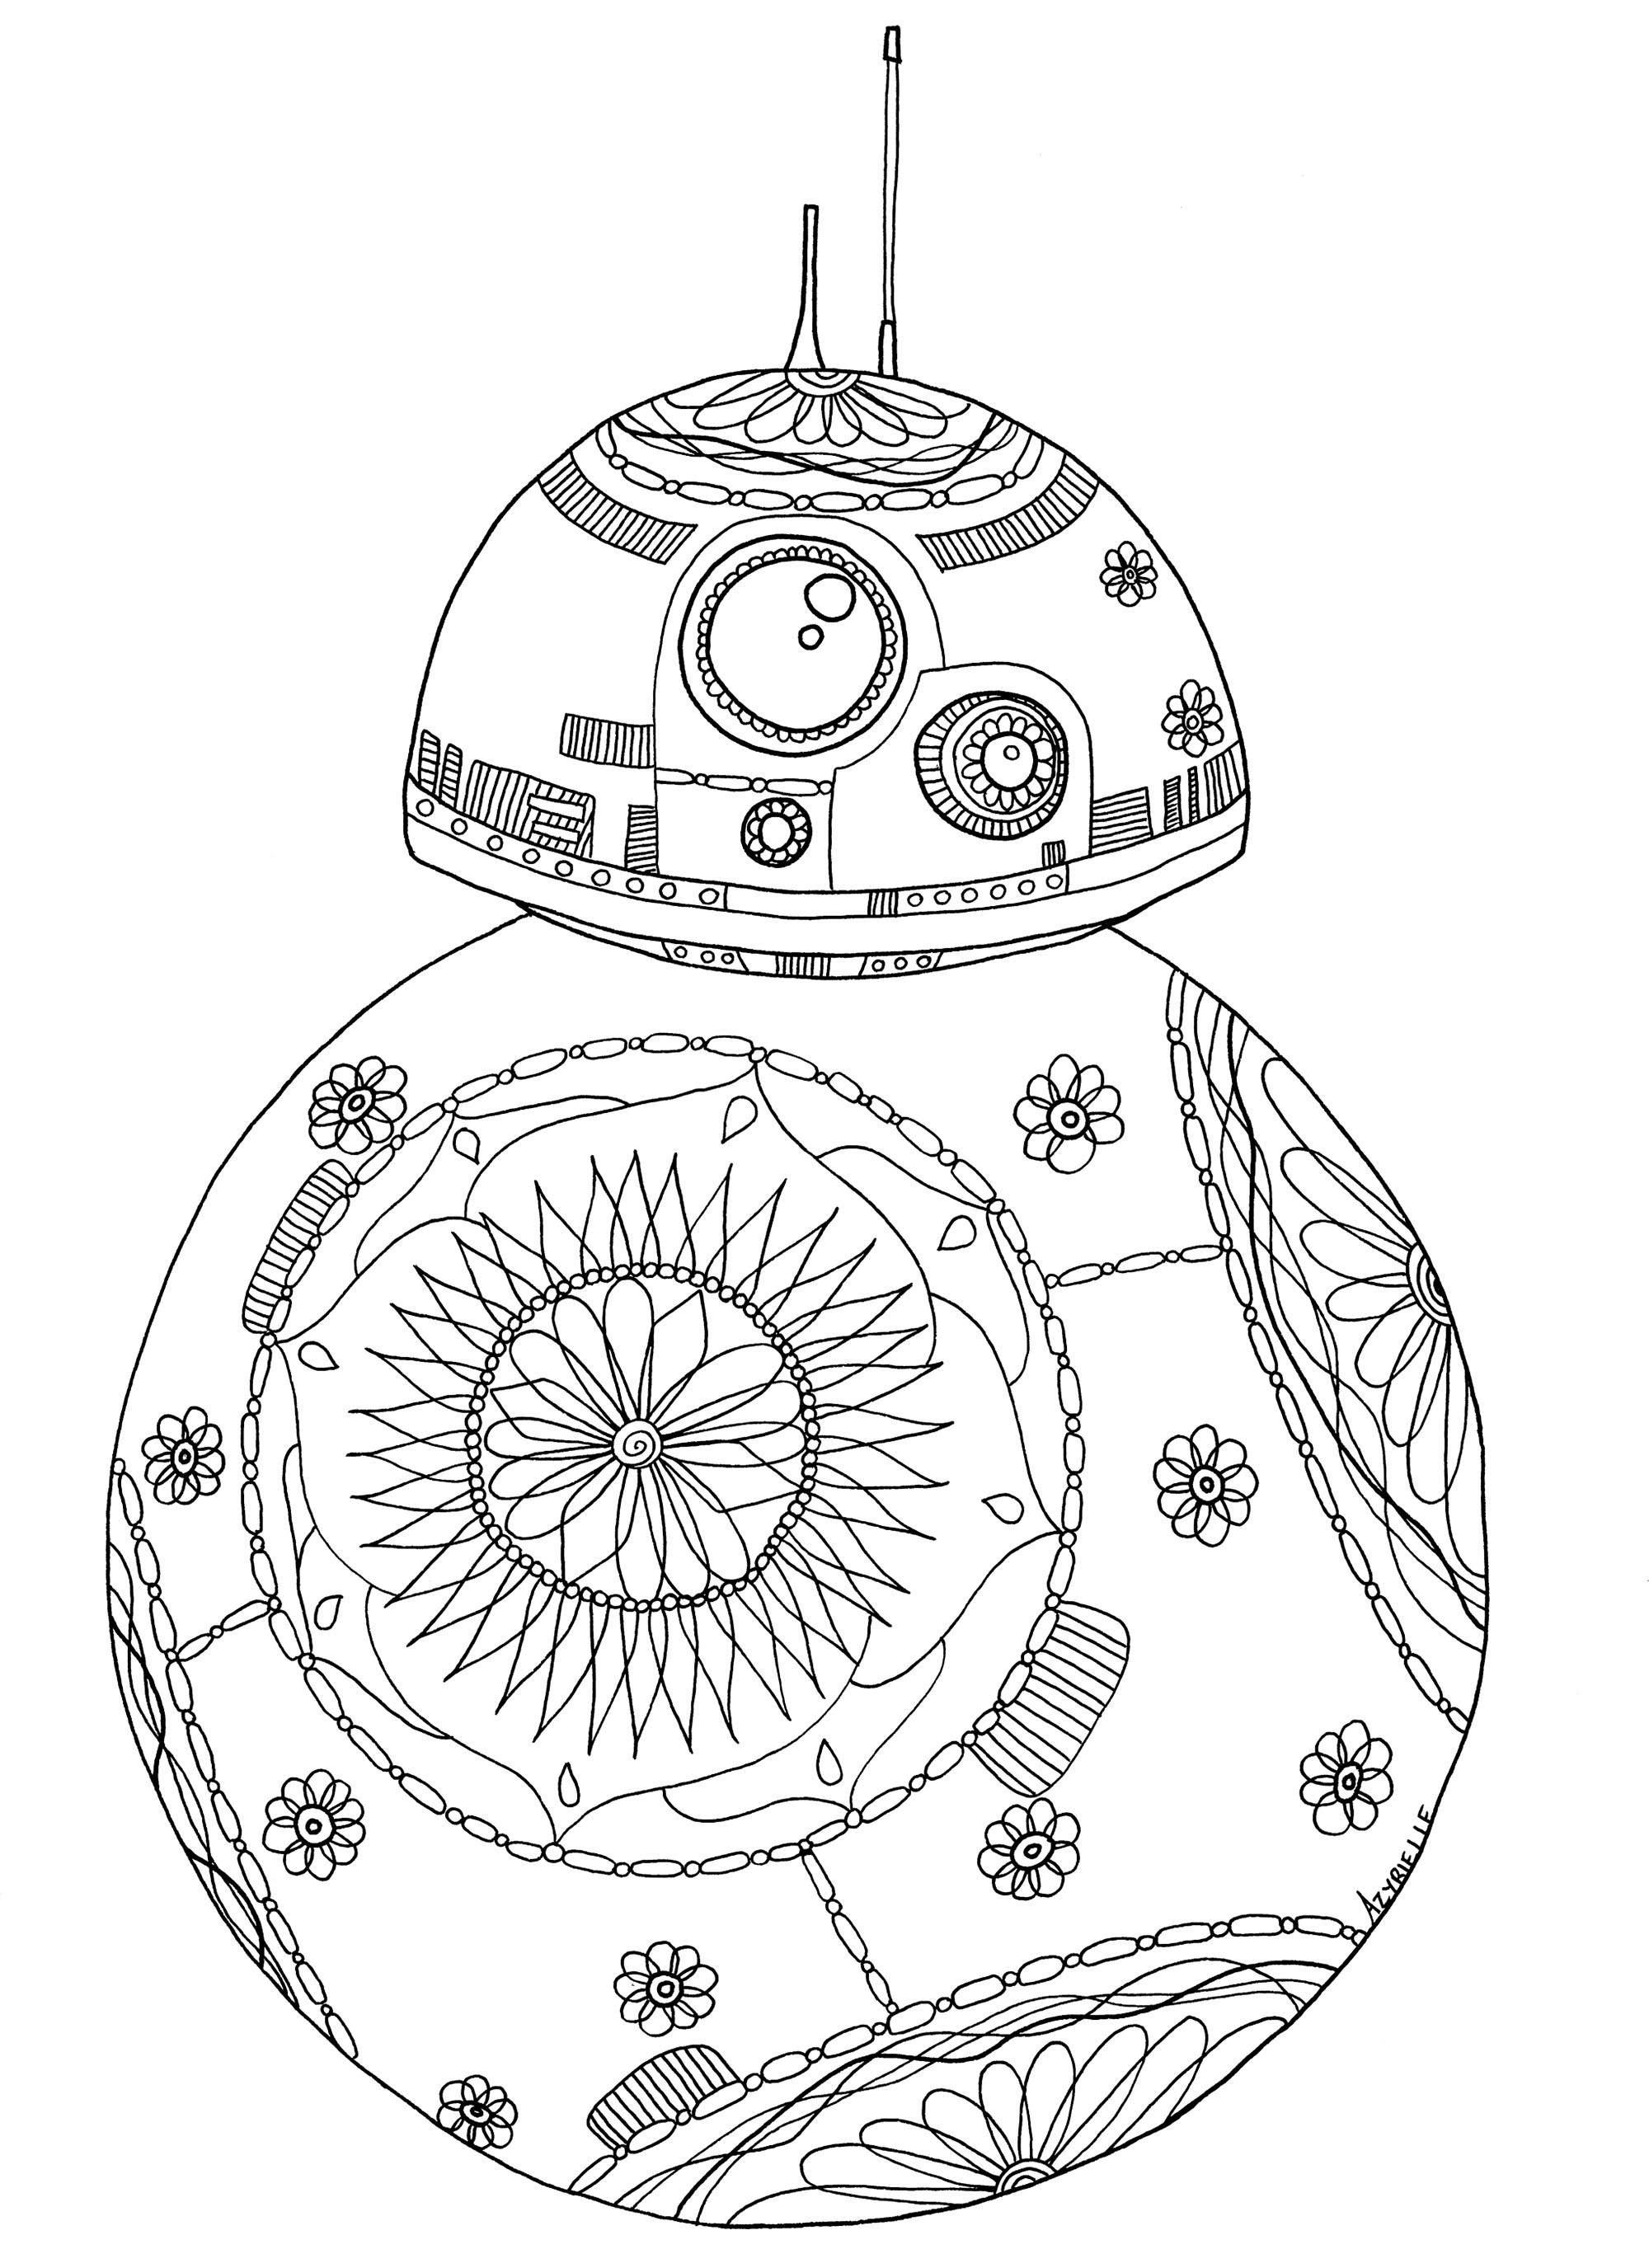 Best ideas about Star Wars Coloring Pages For Adults
. Save or Pin Star wars Coloring Pages for Adults Now.